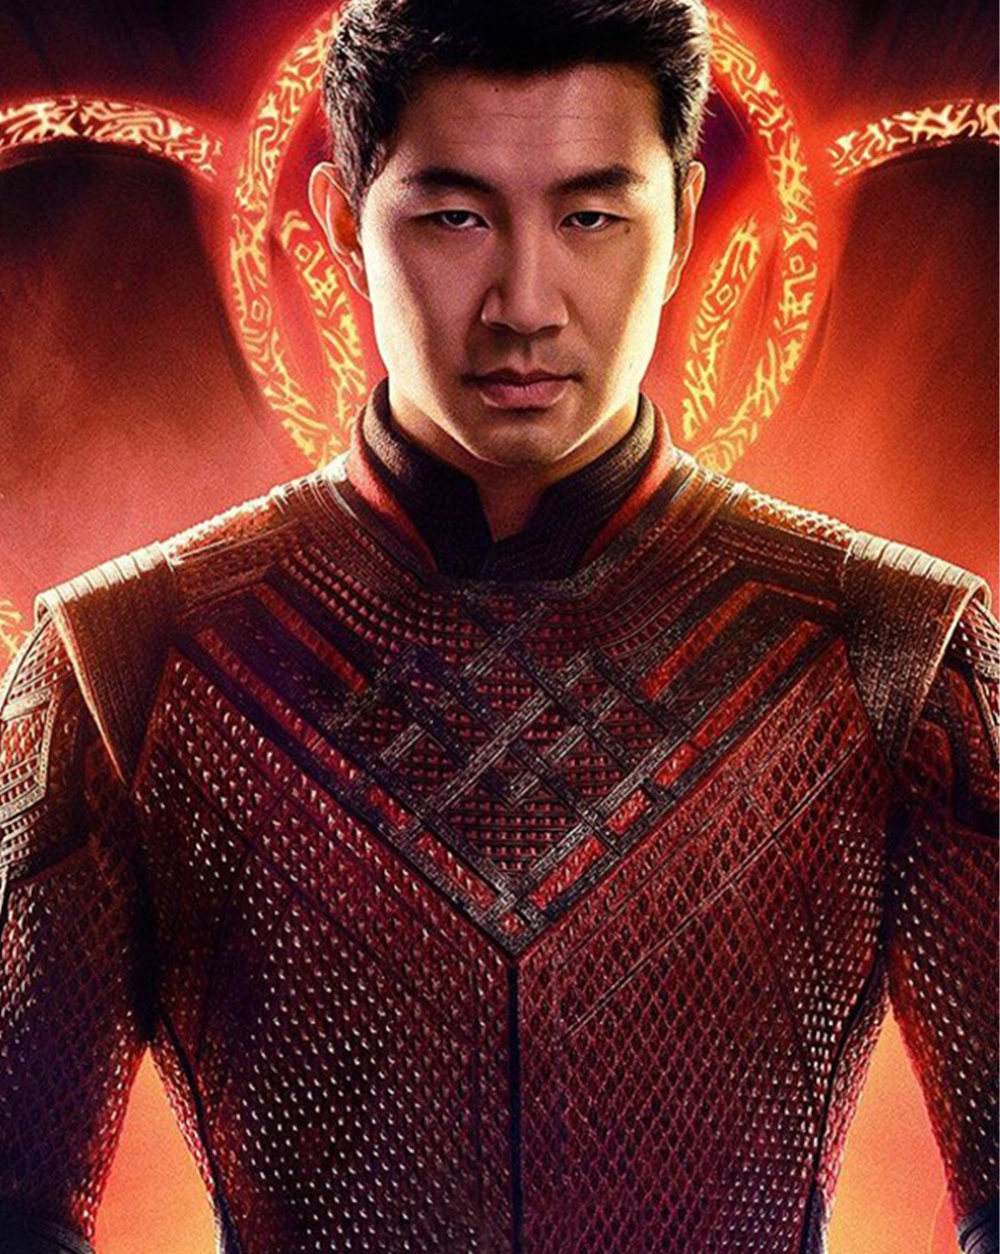 shang-chi Shang-Chi and the Legend of the Ten Rings Red Jacket